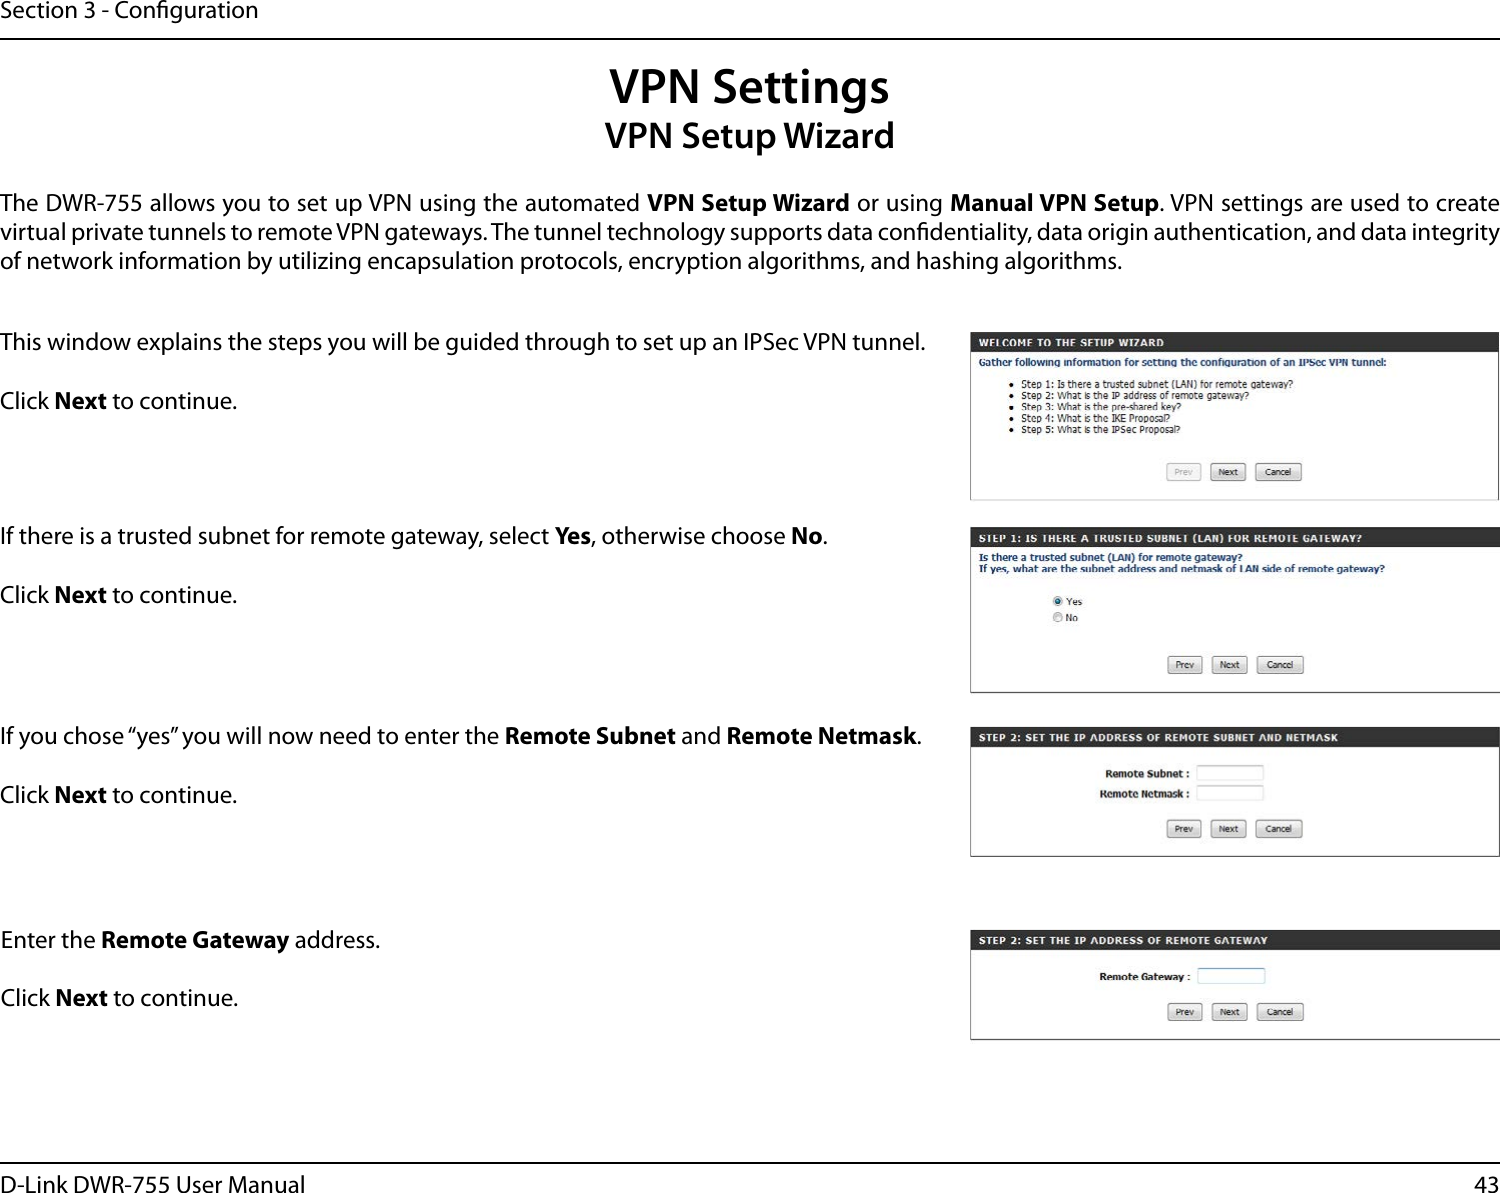 43D-Link DWR-755 User ManualSection 3 - CongurationVPN SettingsVPN Setup WizardThe DWR-755 allows you to set up VPN using the automated VPN Setup Wizard or using Manual VPN Setup. VPN settings are used to create virtual private tunnels to remote VPN gateways. The tunnel technology supports data condentiality, data origin authentication, and data integrity of network information by utilizing encapsulation protocols, encryption algorithms, and hashing algorithms.This window explains the steps you will be guided through to set up an IPSec VPN tunnel.Click Next to continue. If there is a trusted subnet for remote gateway, select Ye s, otherwise choose No.Click Next to continue. If you chose “yes” you will now need to enter the Remote Subnet and Remote Netmask. Click Next to continue. Enter the Remote Gateway address.Click Next to continue. 